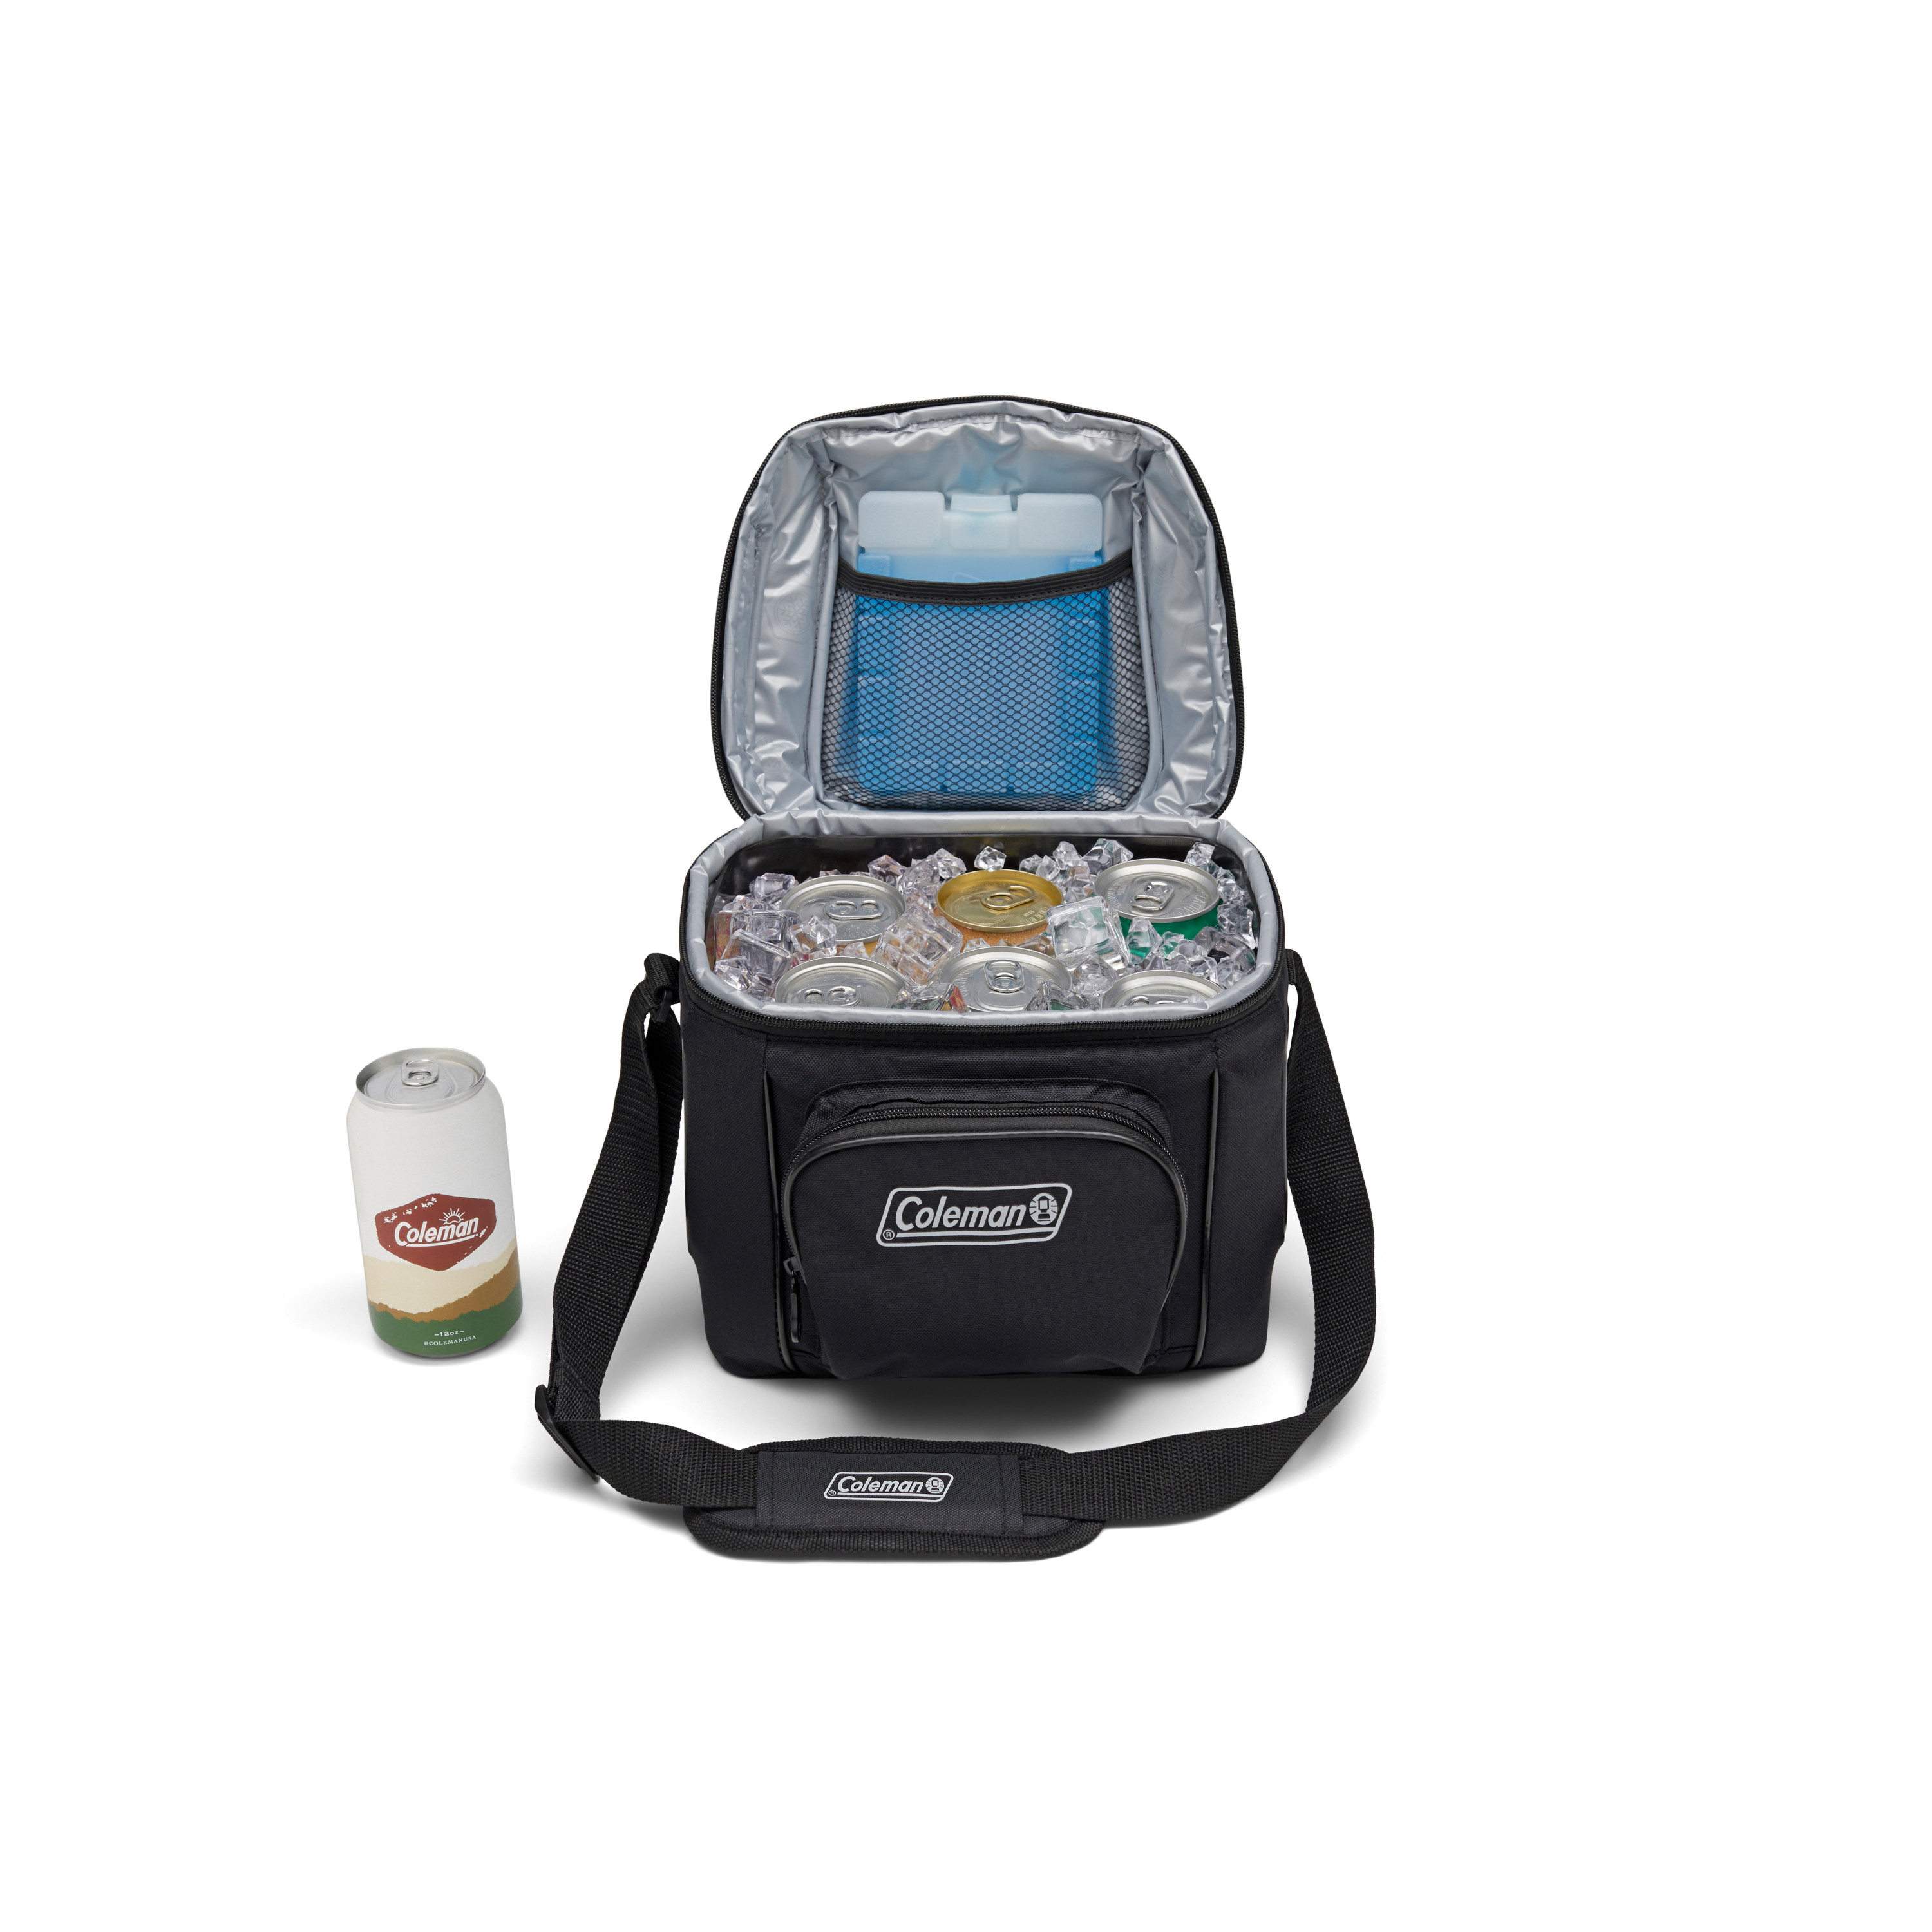 Coleman CHILLER 9-cans Insulated Soft Cooler Bag, Black - image 3 of 5